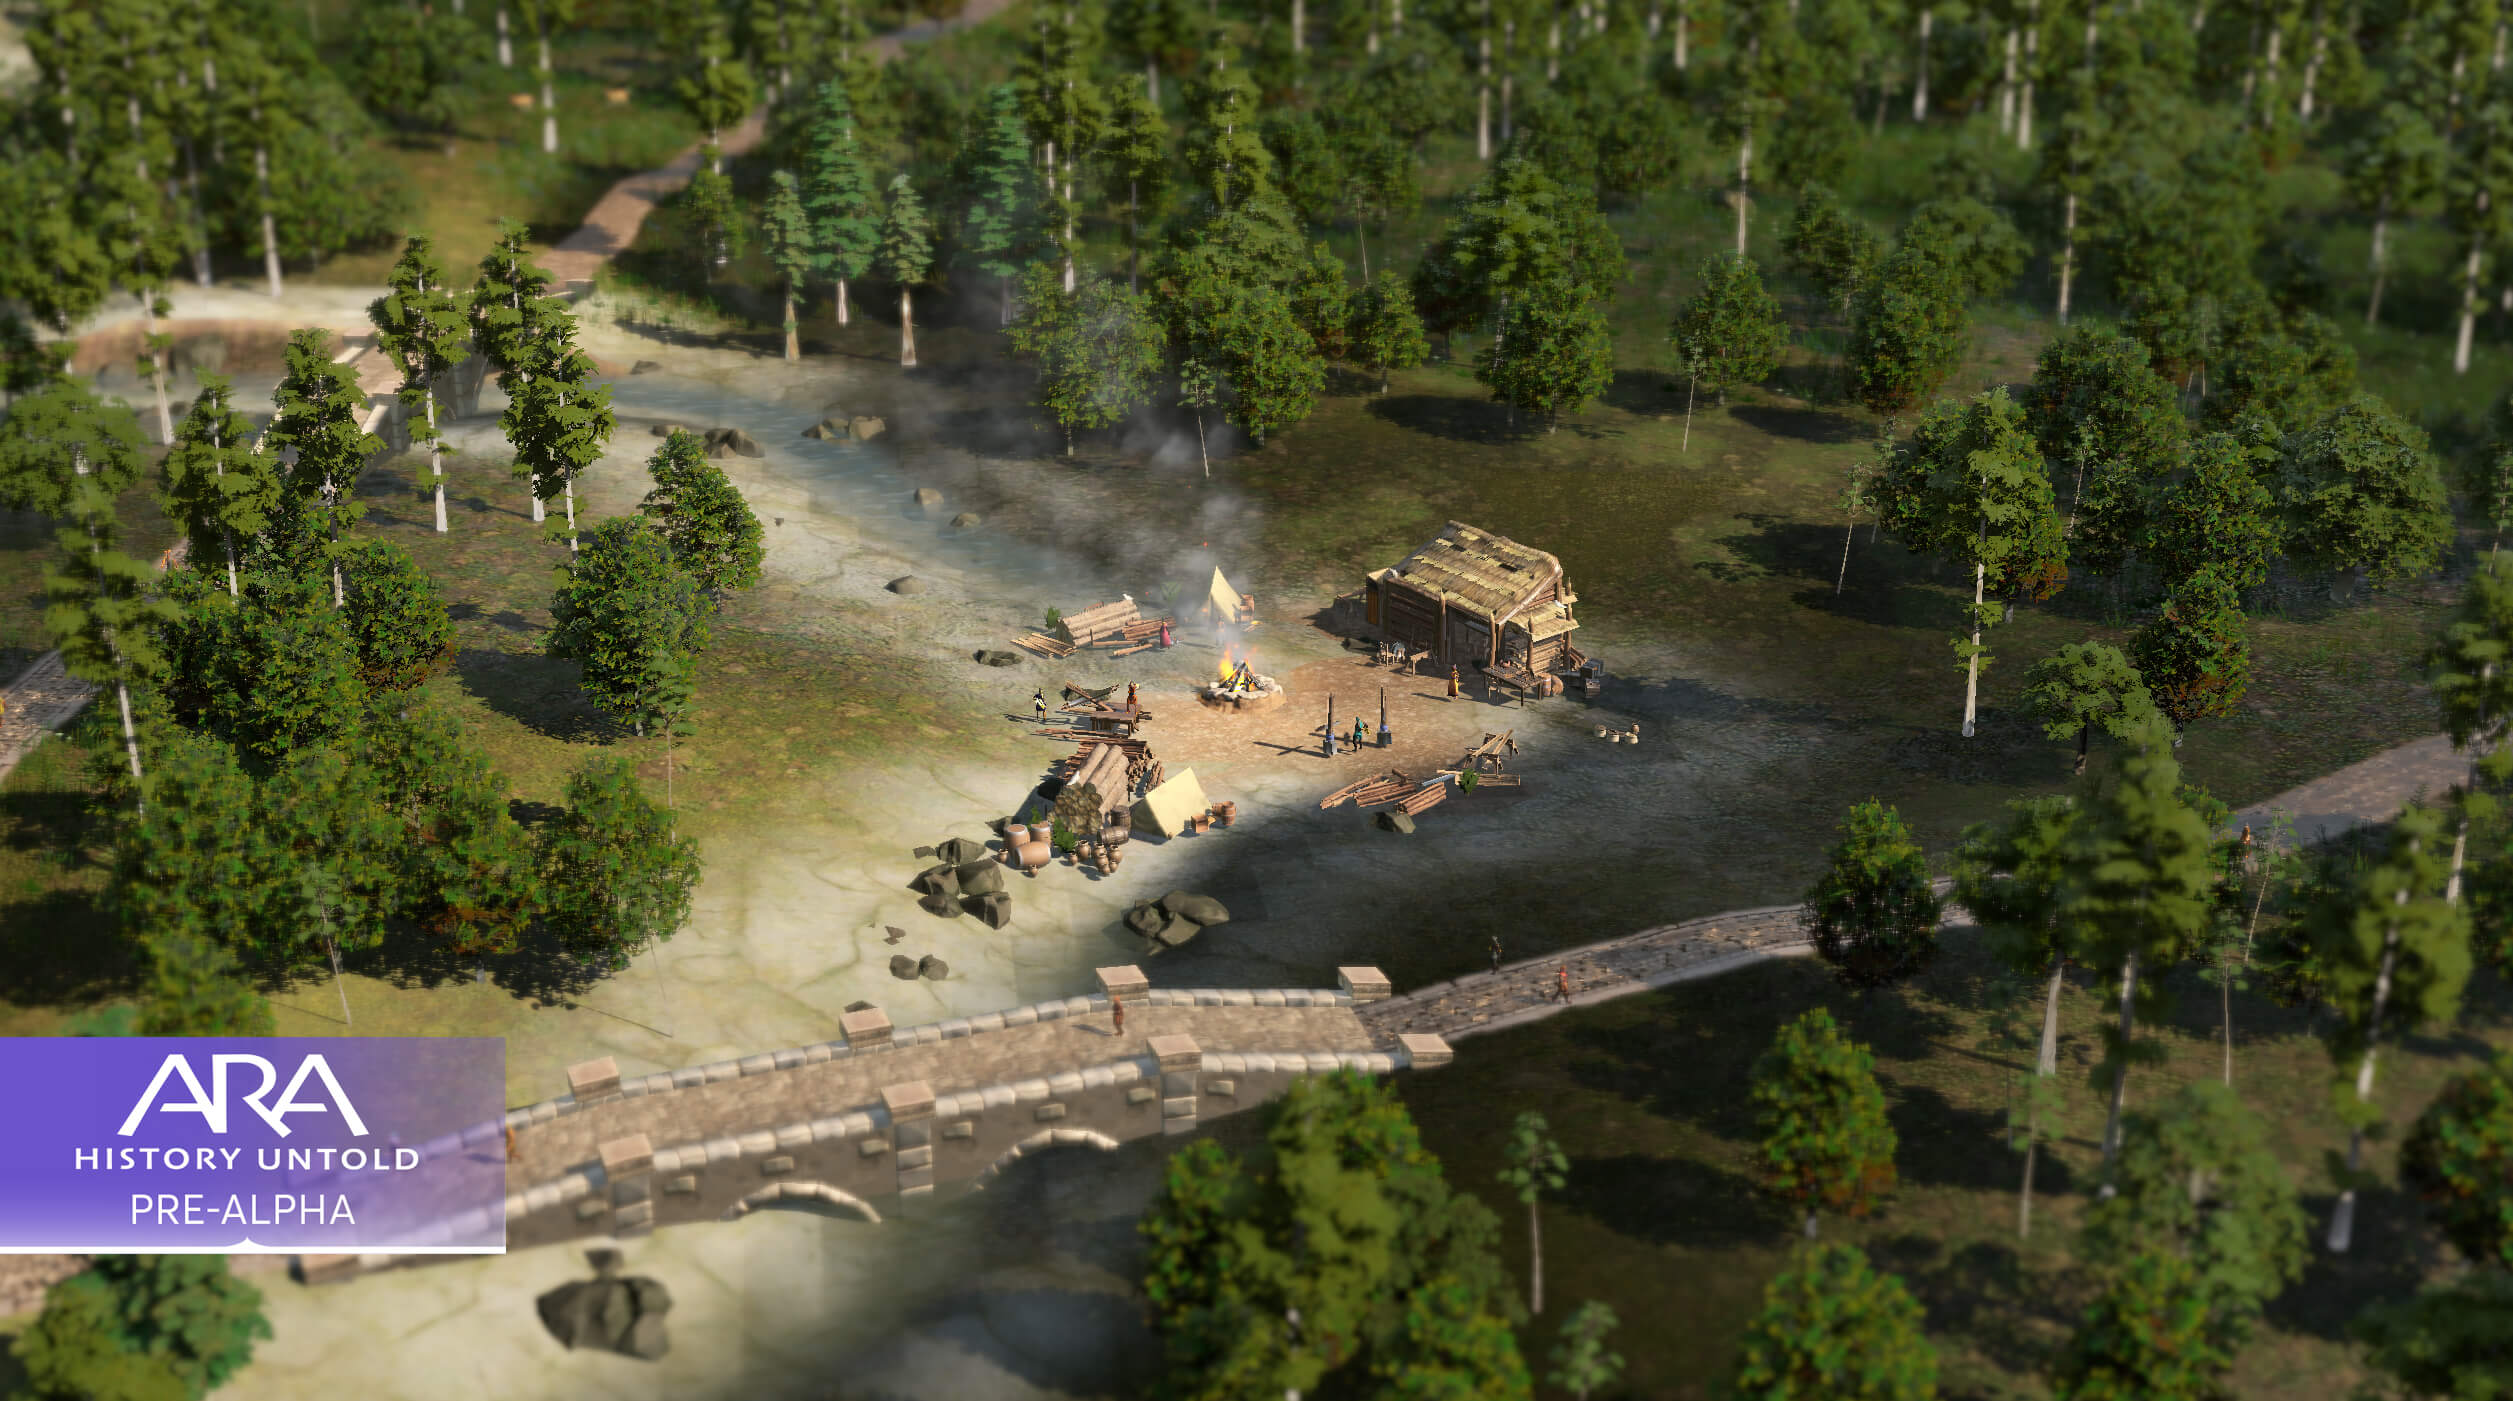 A screenshot of a Logging Camp improvement in the temperate forest of Ara: History Untold.